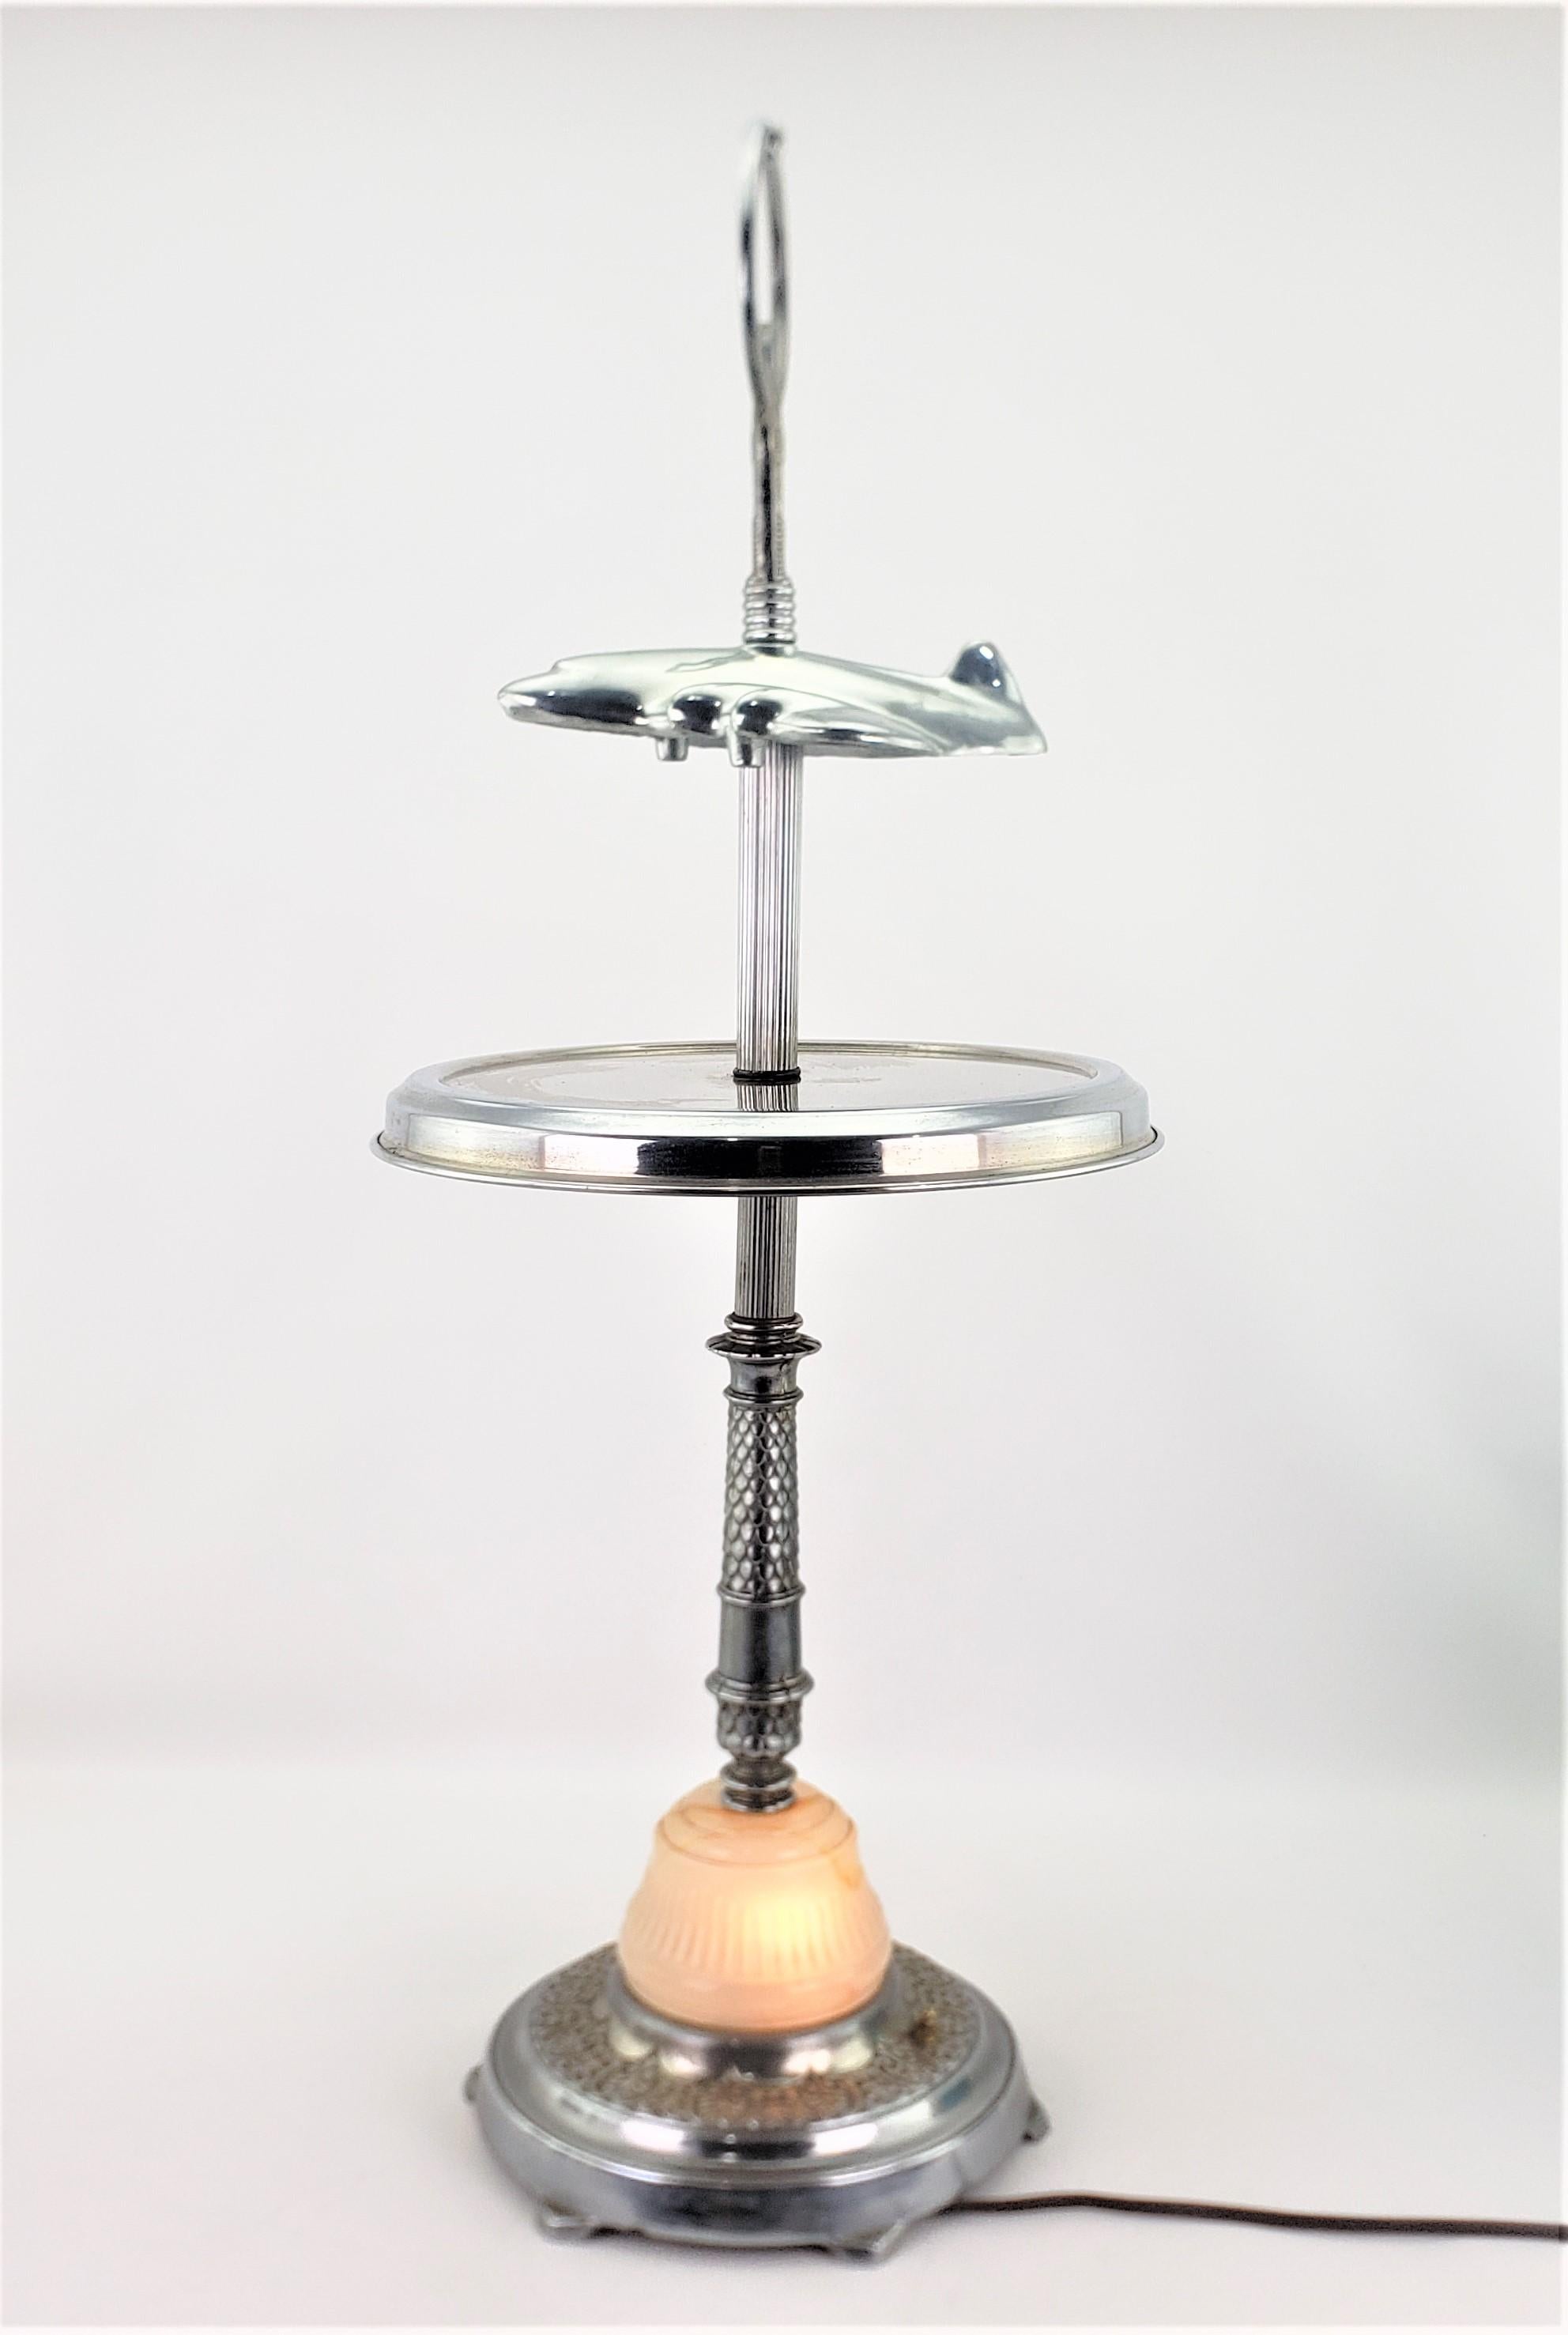 Cast Unique Art Deco Styled Chrome Jet Airplane Lighted Smoker's Stand or Table For Sale